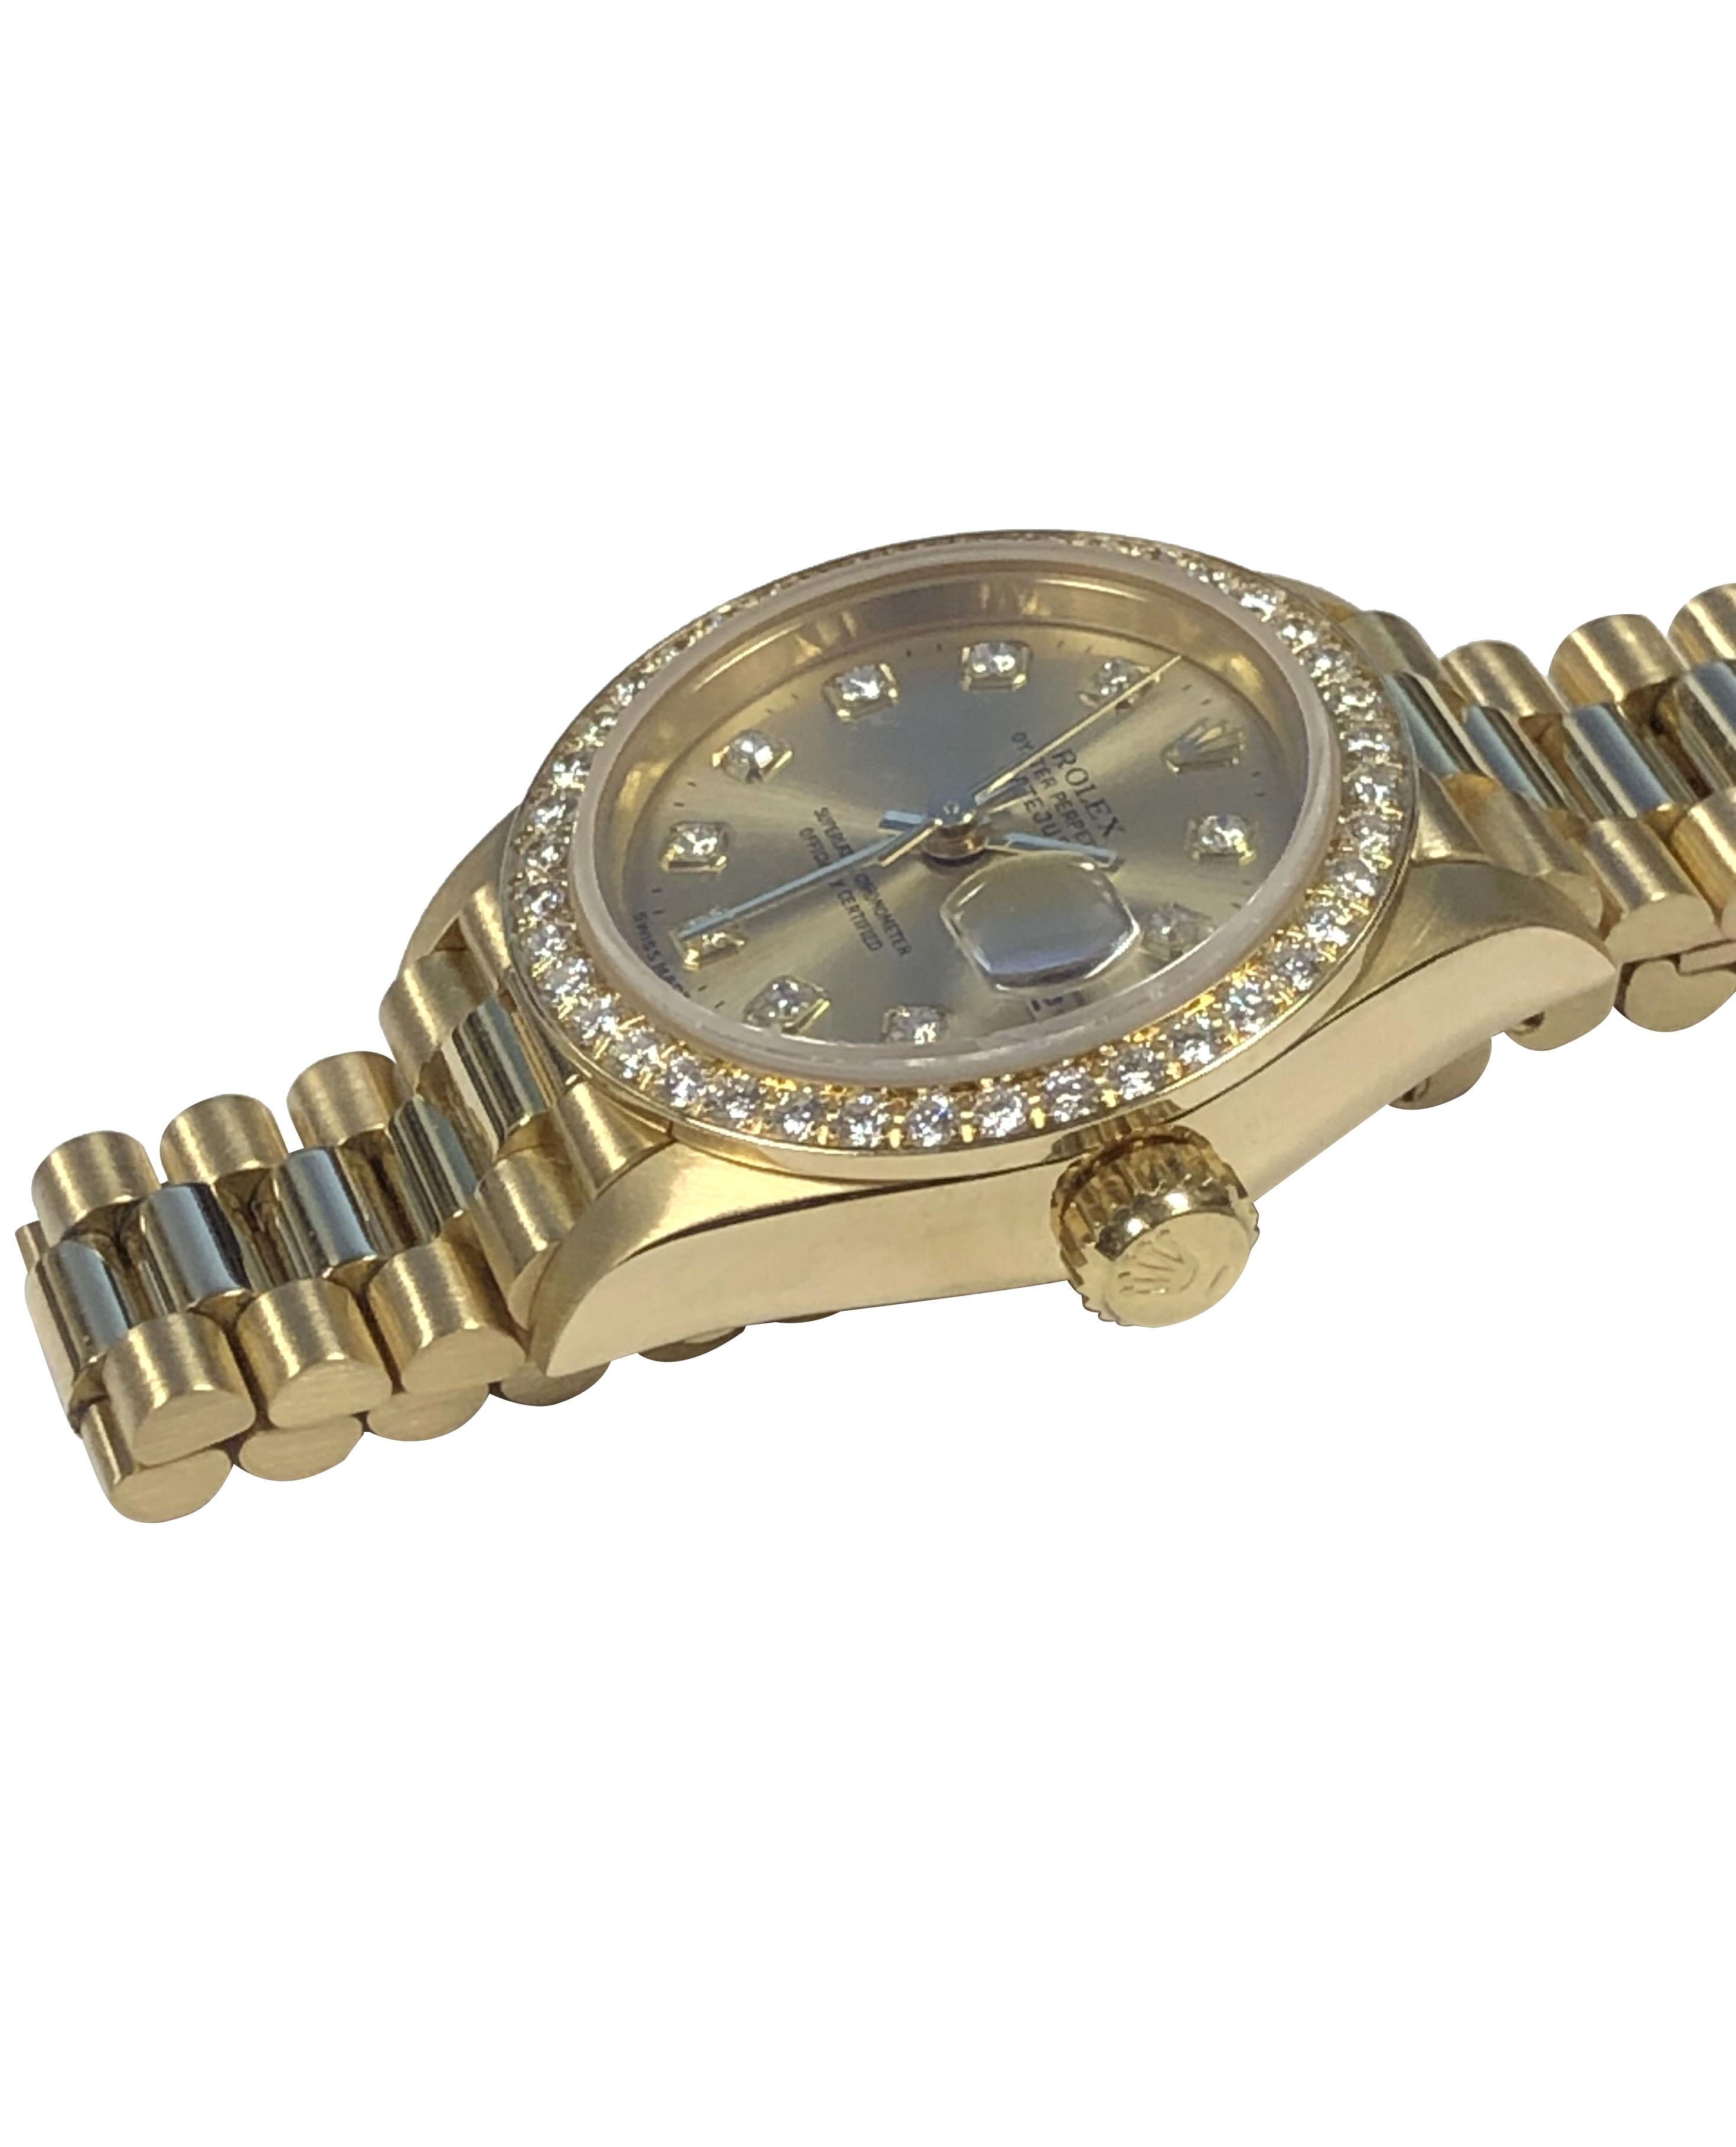 Circa 1995 Rolex Presidential model Ladies Reference 69138 Wrist Watch, 26 M.M. 18k Yellow Gold 3 piece water resistant Oyster case. Factory original Full cut Diamond bezel totaling approximately 1 Carat,  29 Jewel Caliber 2135 Automatic, self